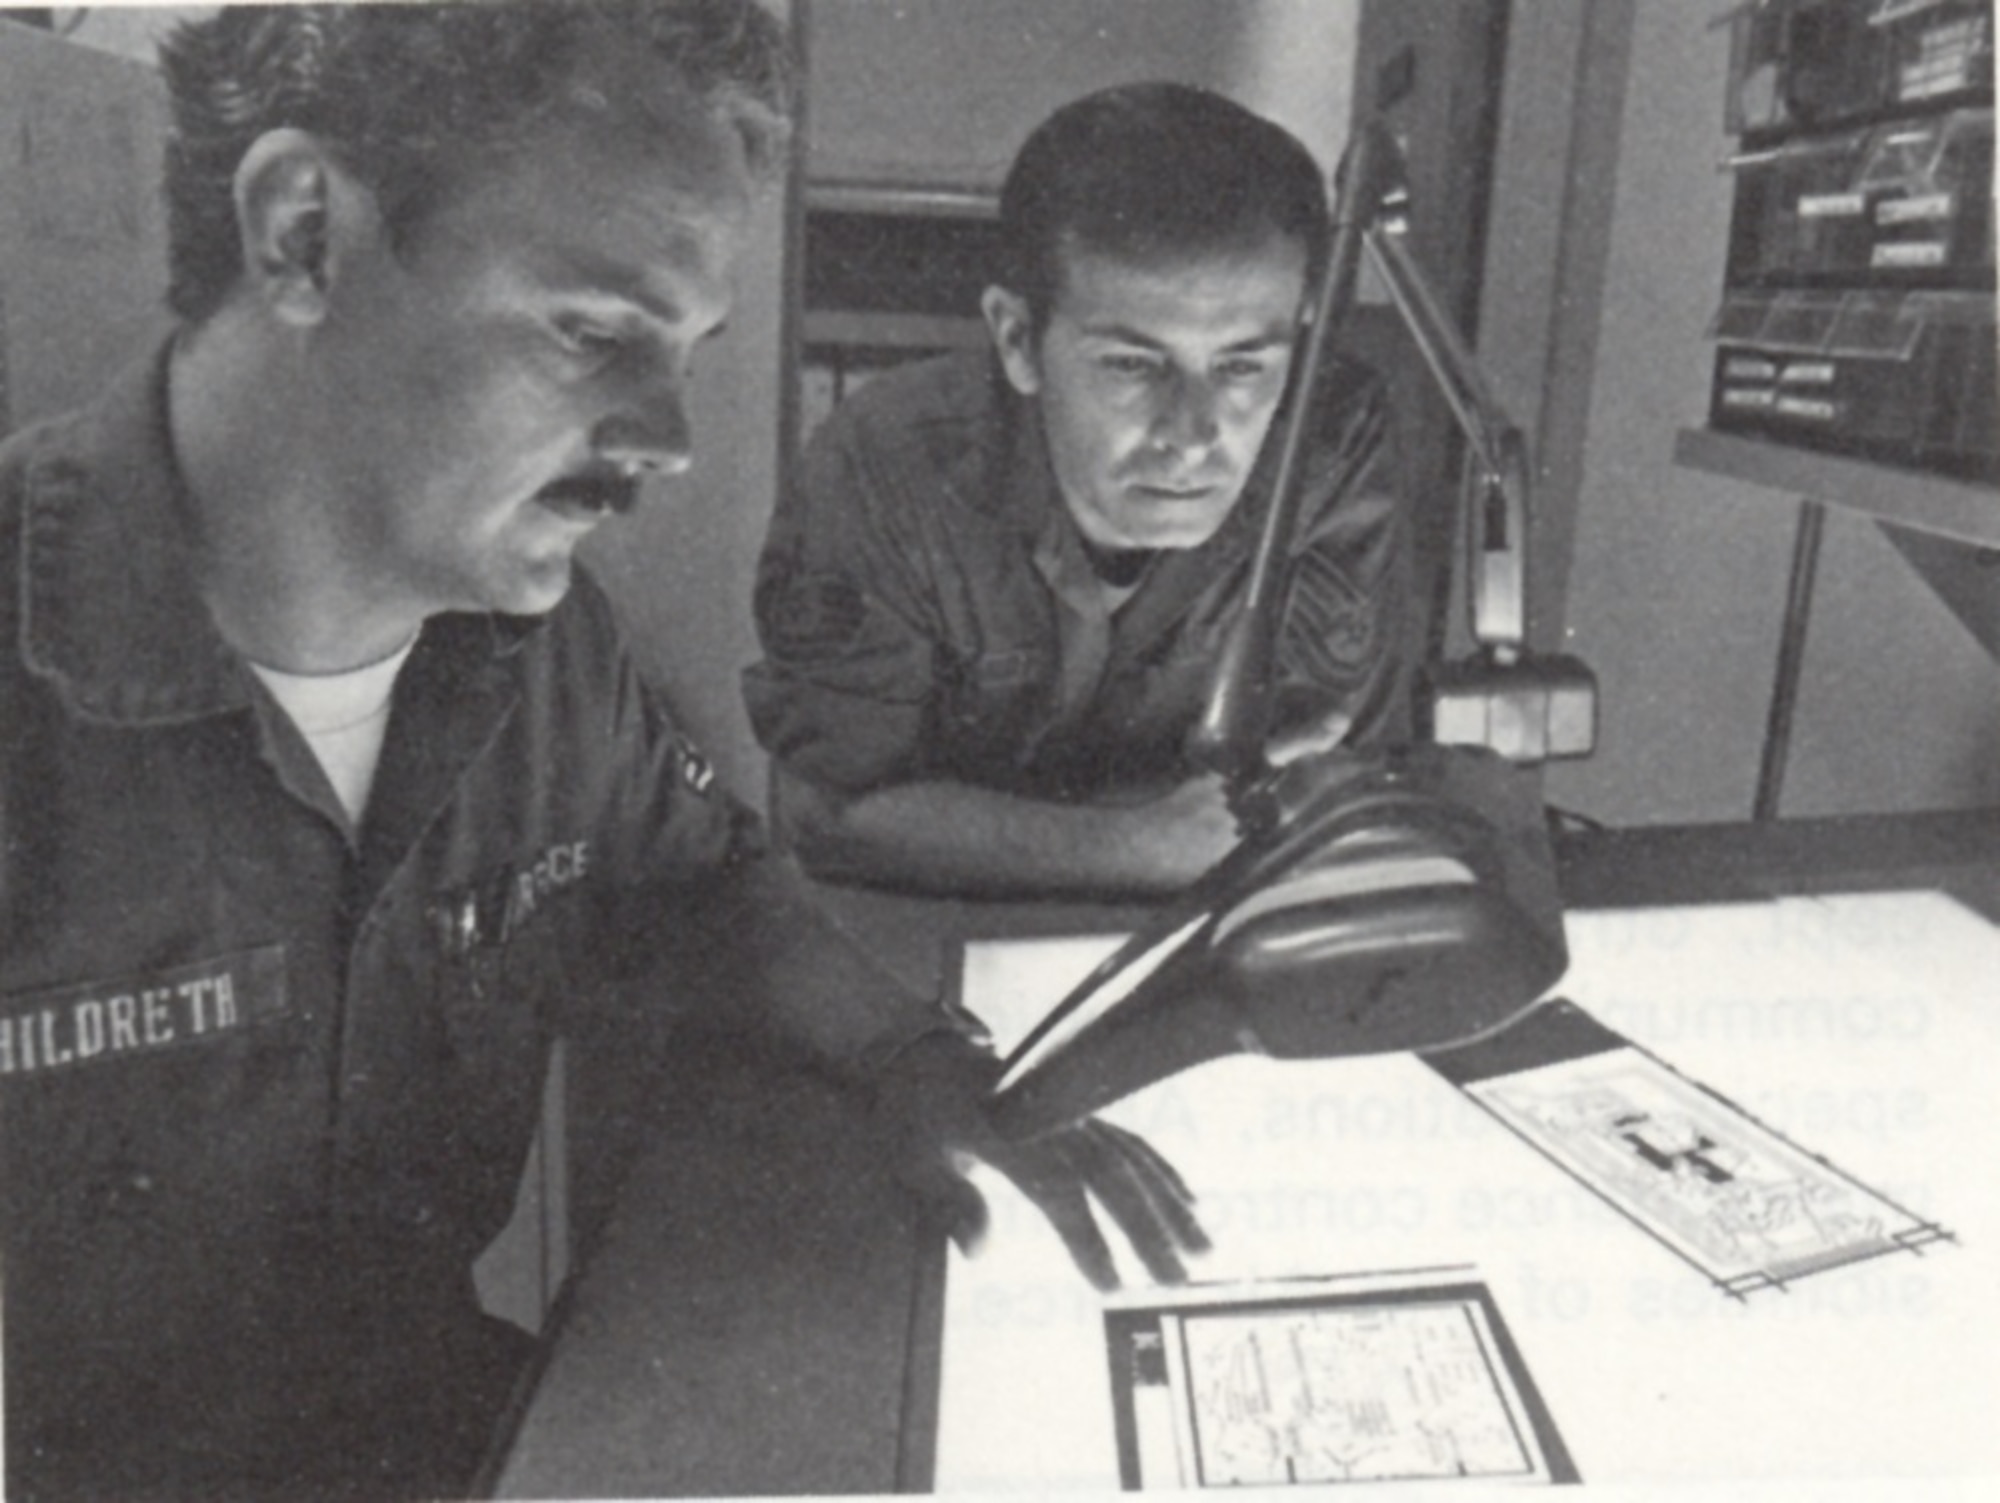 Members of the 1842nd Electronics Engineering Group review circuit board negatives, Scott AFB, Illinois.